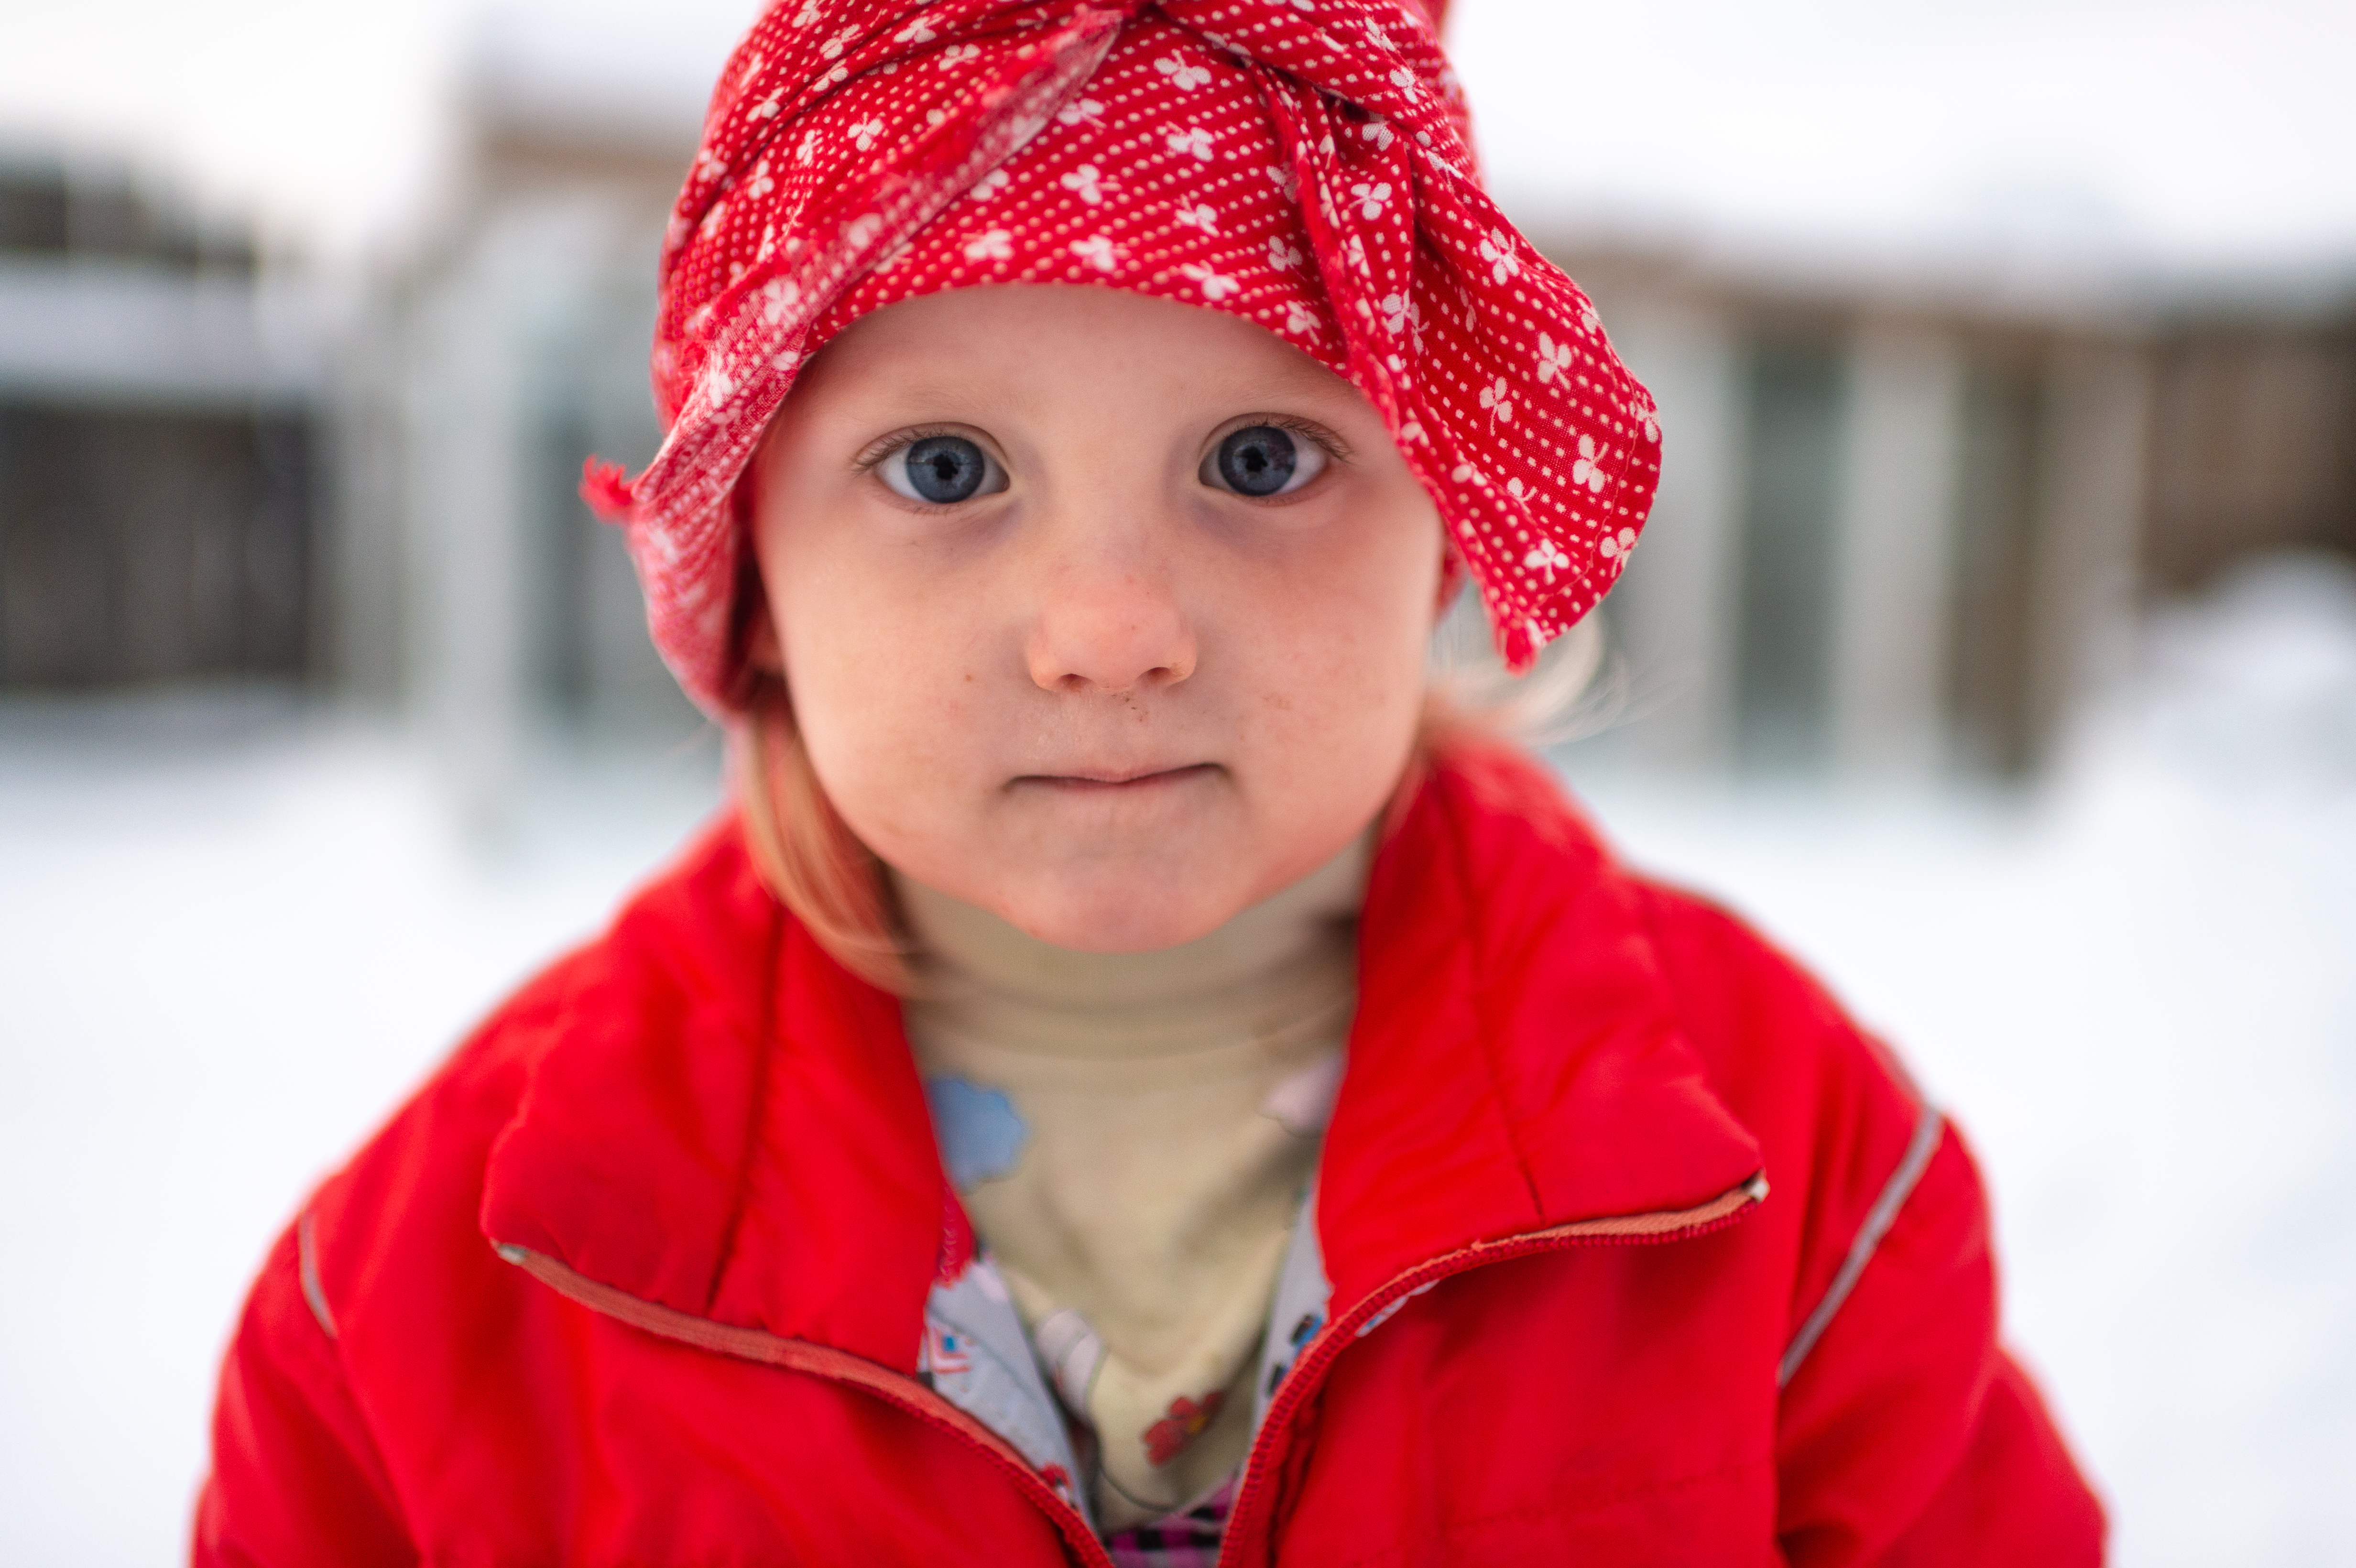 A child in a red coat | Source: Shutterstock